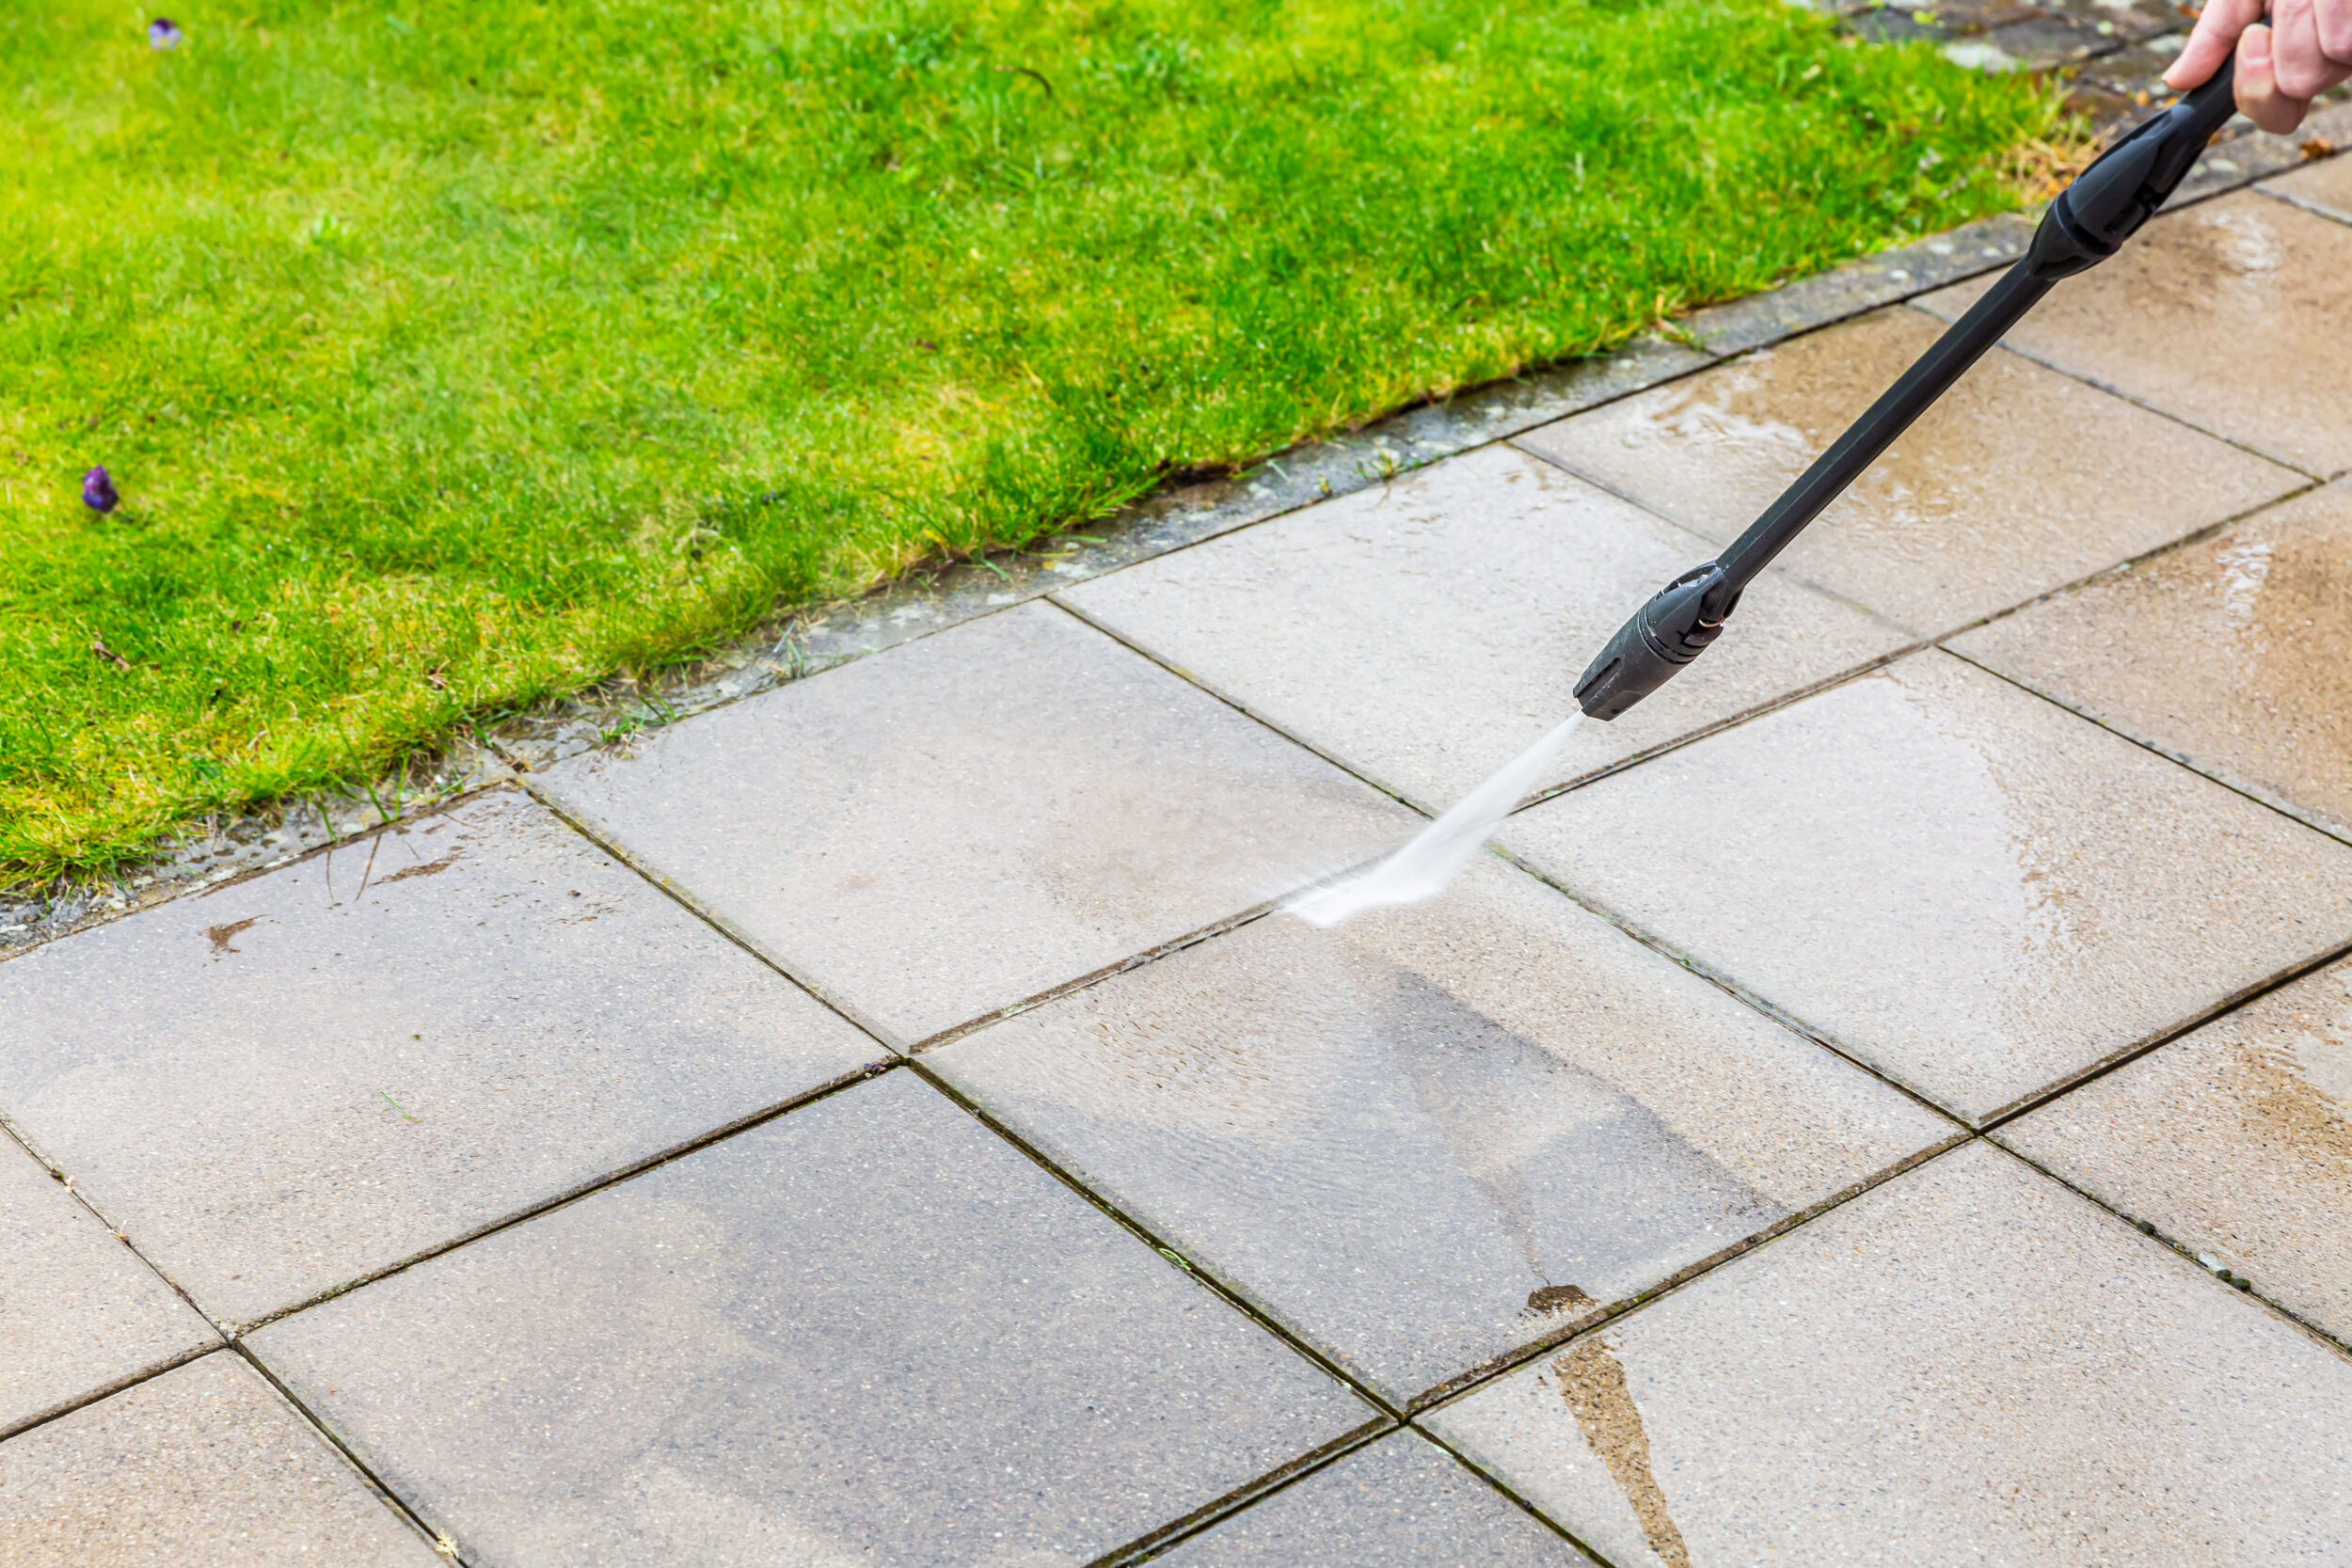 Detail Of Cleaning Terrace With High Pressure Water Blaster, Cleaning Dirty Paving Stones